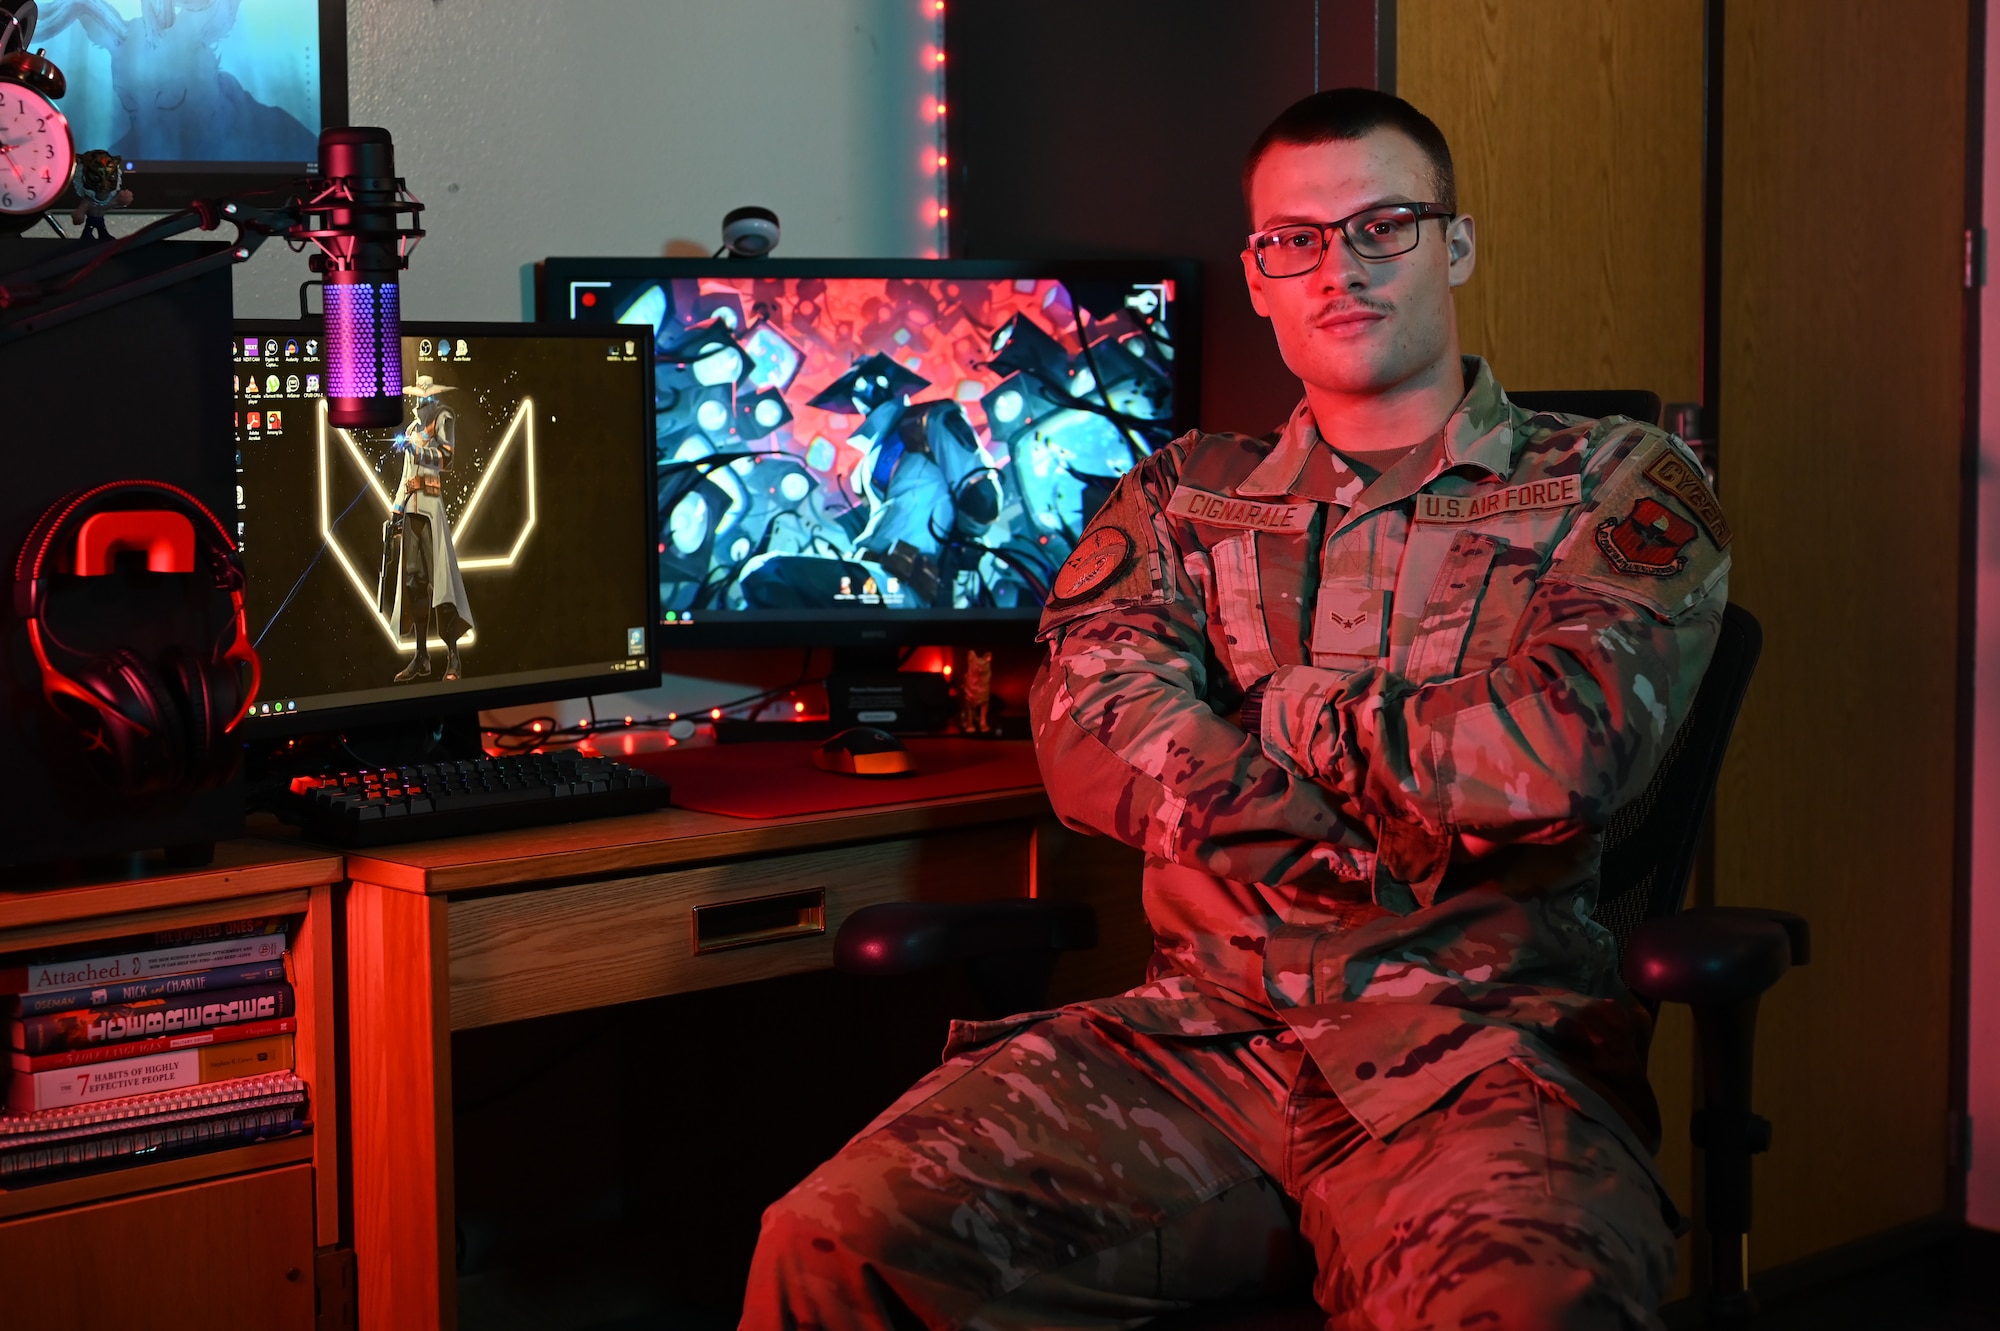 U.S. Air Force Airman 1st Class Xander Cignarale, 47th Communication Support Squadron security operations apprentice and member of the Laughlin Gaming Team, sits at a computer at Laughlin Air Force Base, Texas, July 10, 2023.